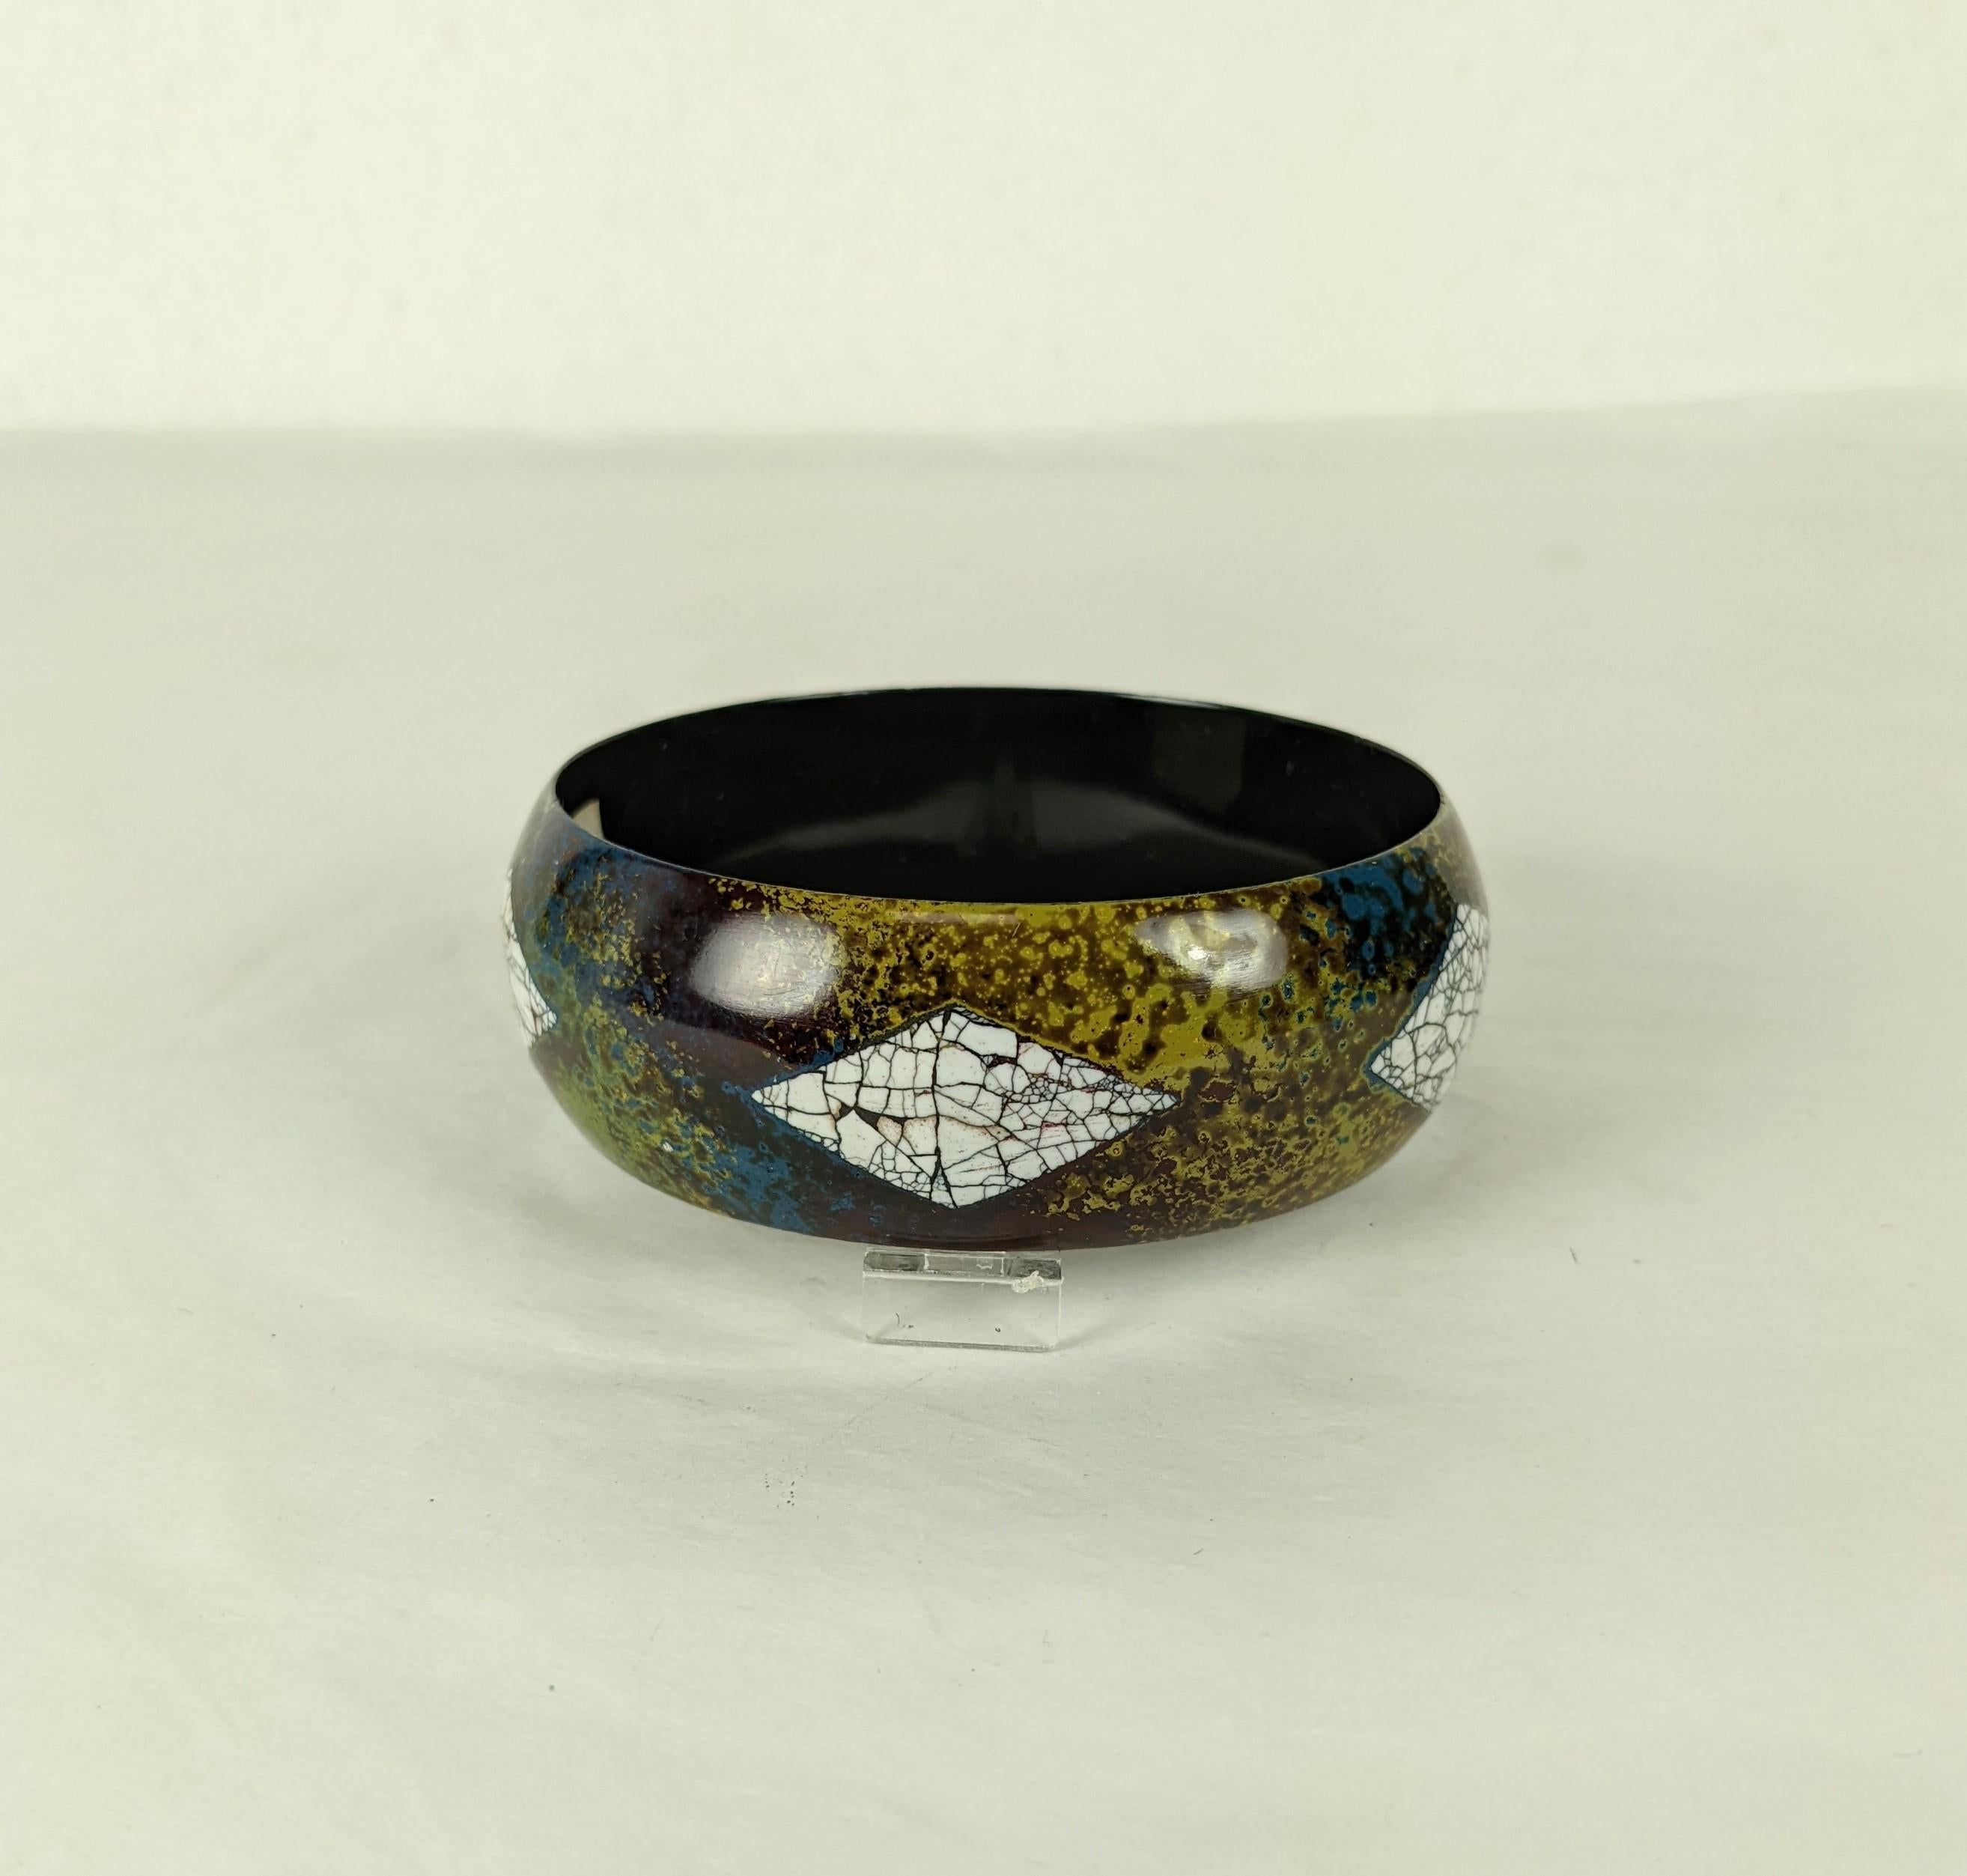 Art Deco Eggshell Lacquer Bangle Bracelet. The round and bombe bracelet decorated with five diamond shapes of crackled eggshell lacquer. The bangles background of mottled, stippled earth tones in lacquer. Excellent Condition, Made in France.